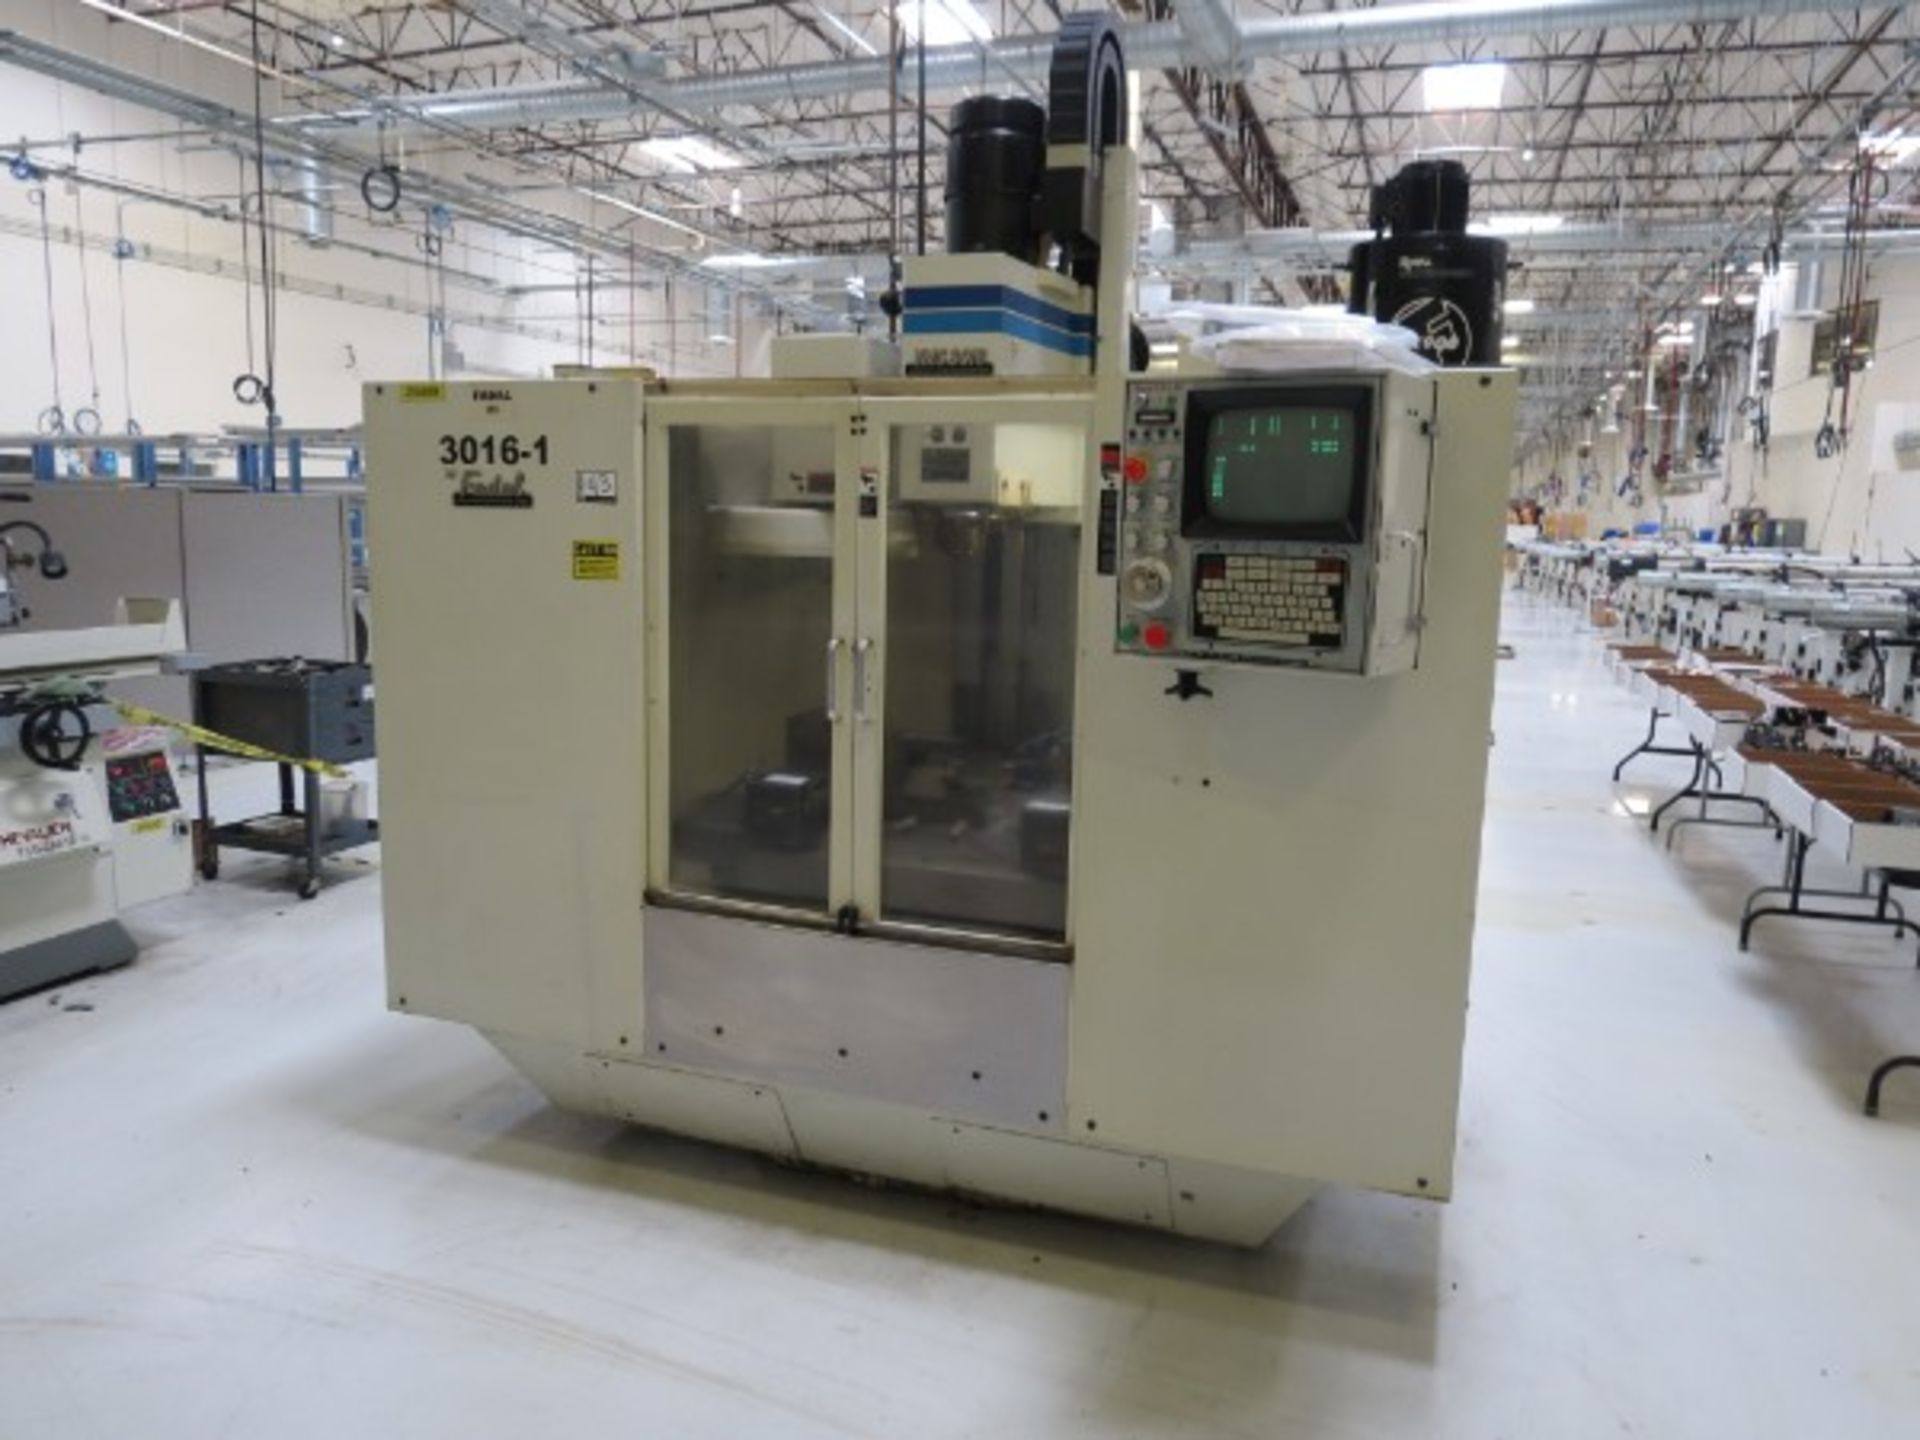 Fadal VMC-3016 4 Axis Vertical Machining Center, 88 control, CT40, 21 ATC, s/n 9209555, new 1992 - Image 4 of 7